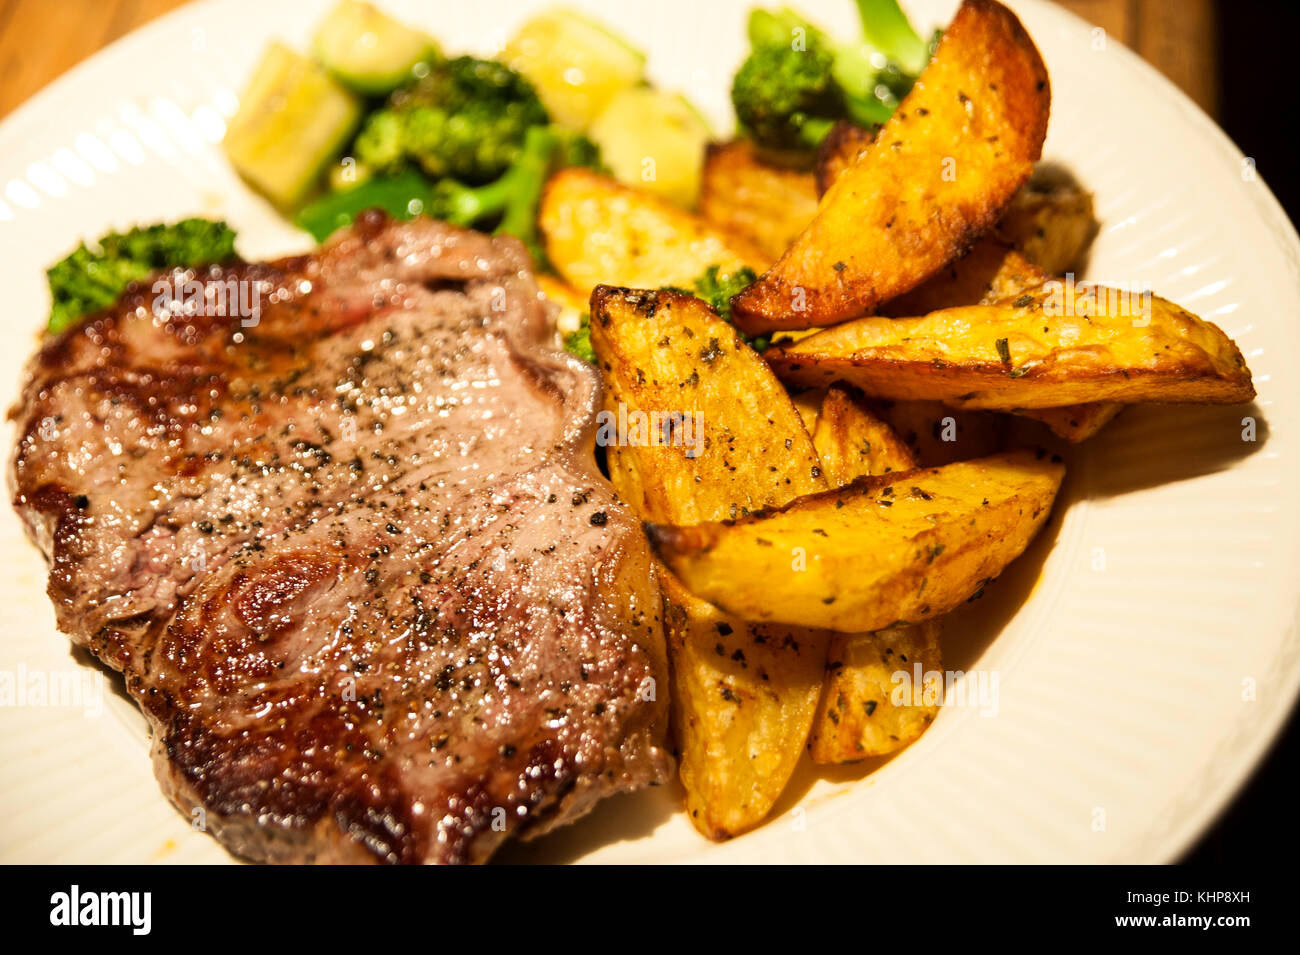 Beefsteak with Baked Potatoes,Broccoli and Zucchini Stock Photo